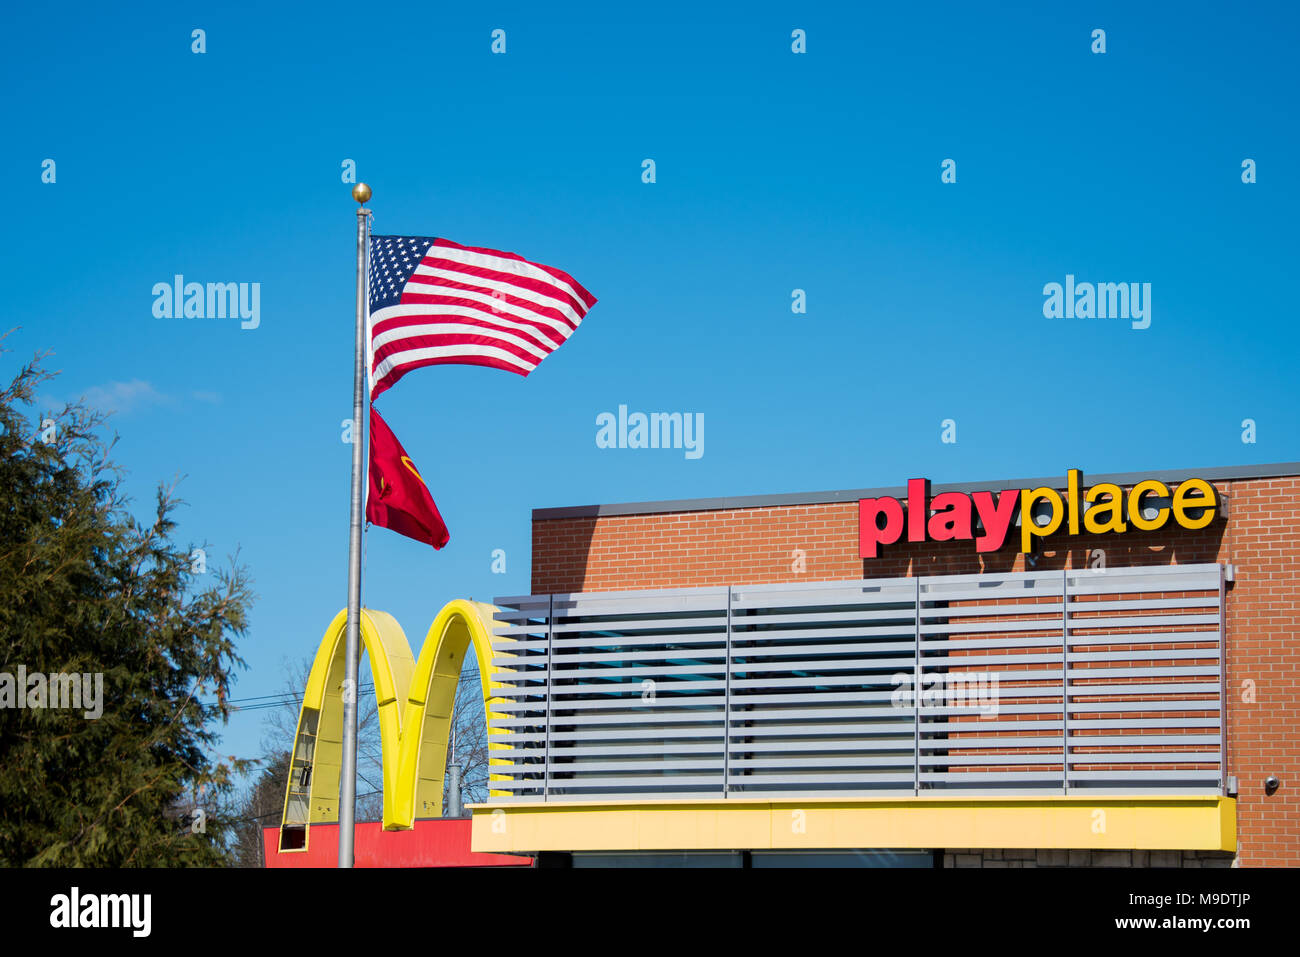 McDonald's playplace and fast food restaurant in Gloversville, NY USA Stock Photo